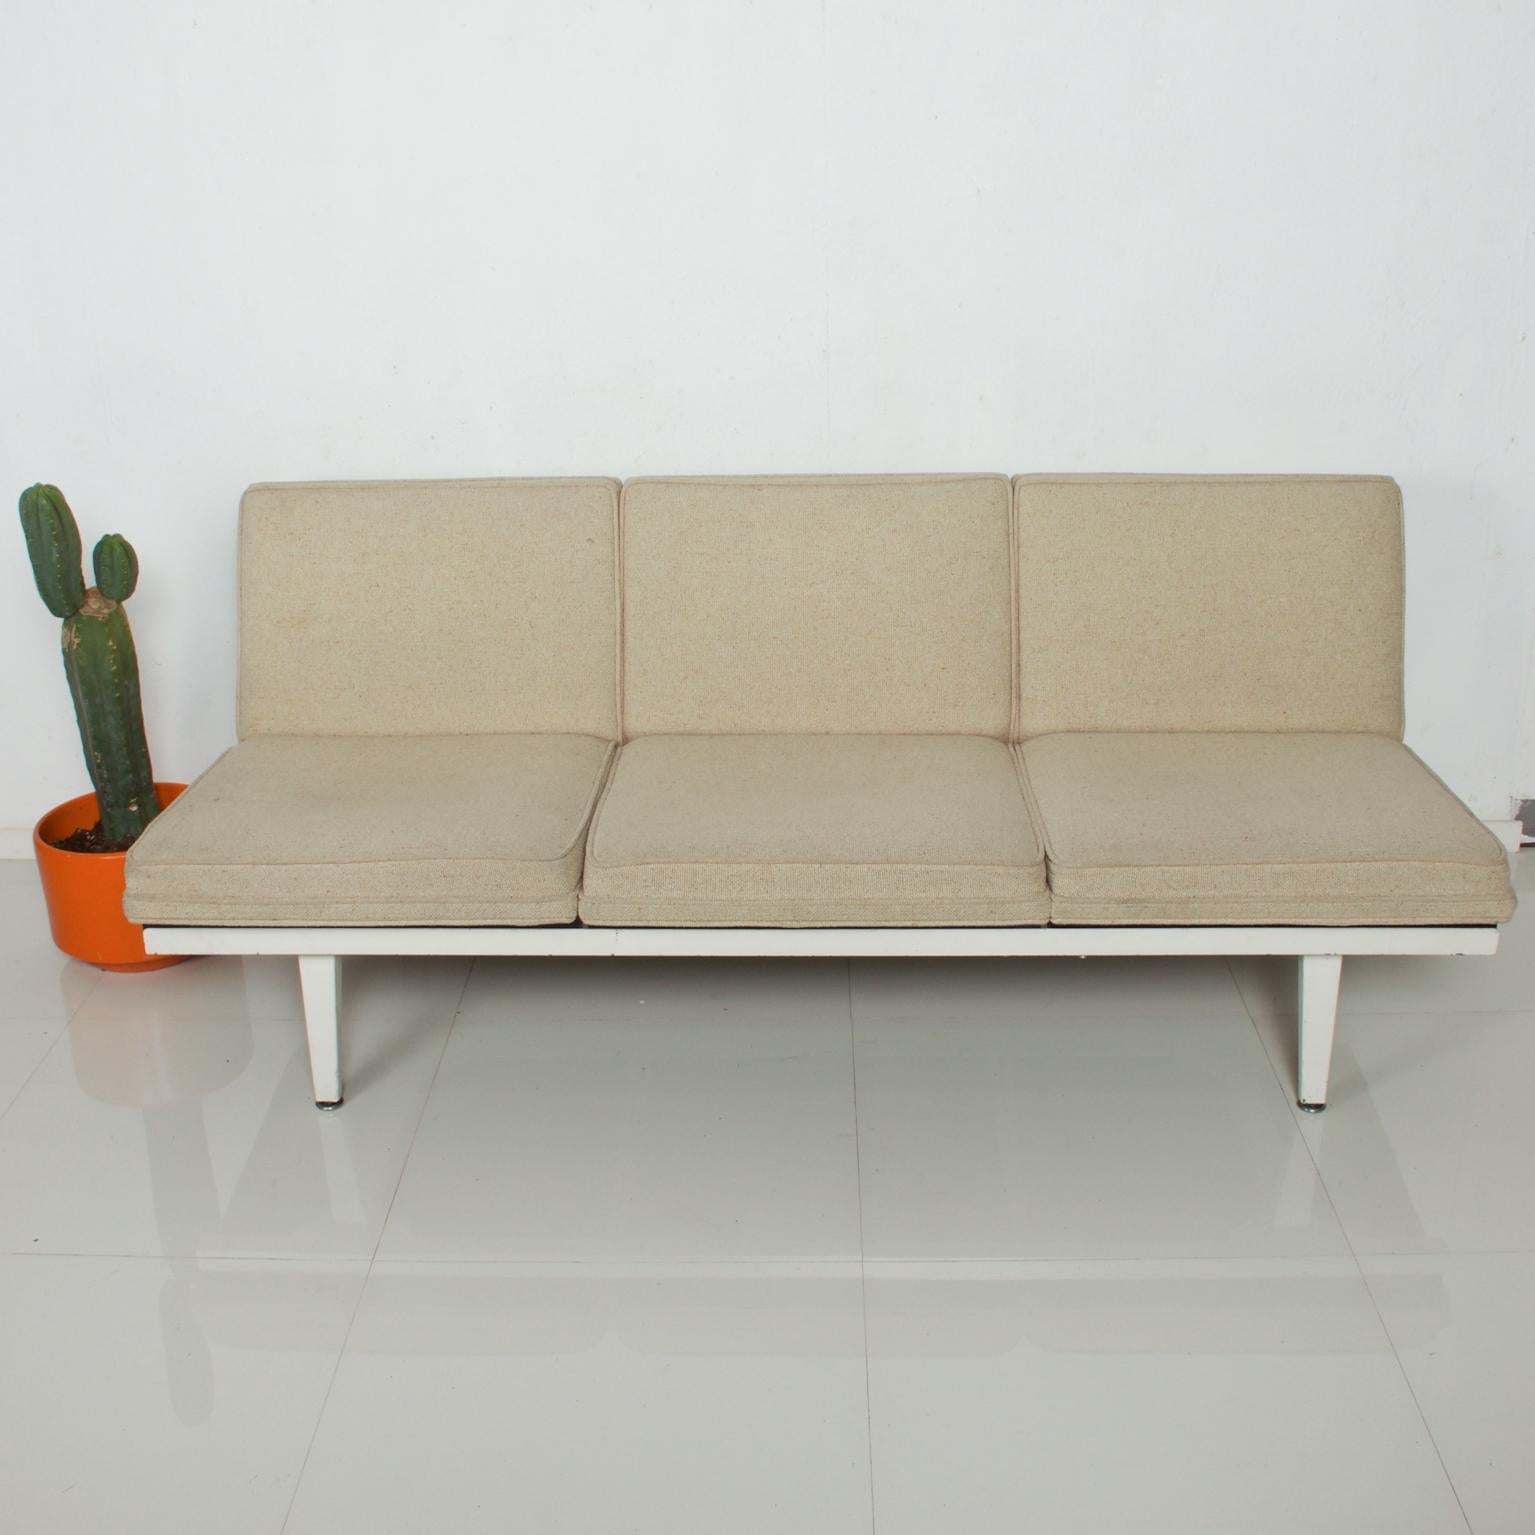 We are pleased to offer for your consideration a vintage George Nelson Sofa for Herman Miller. 

Made in the USA circa 1950s. White upholstery in good condition. 

Dimensions: 72